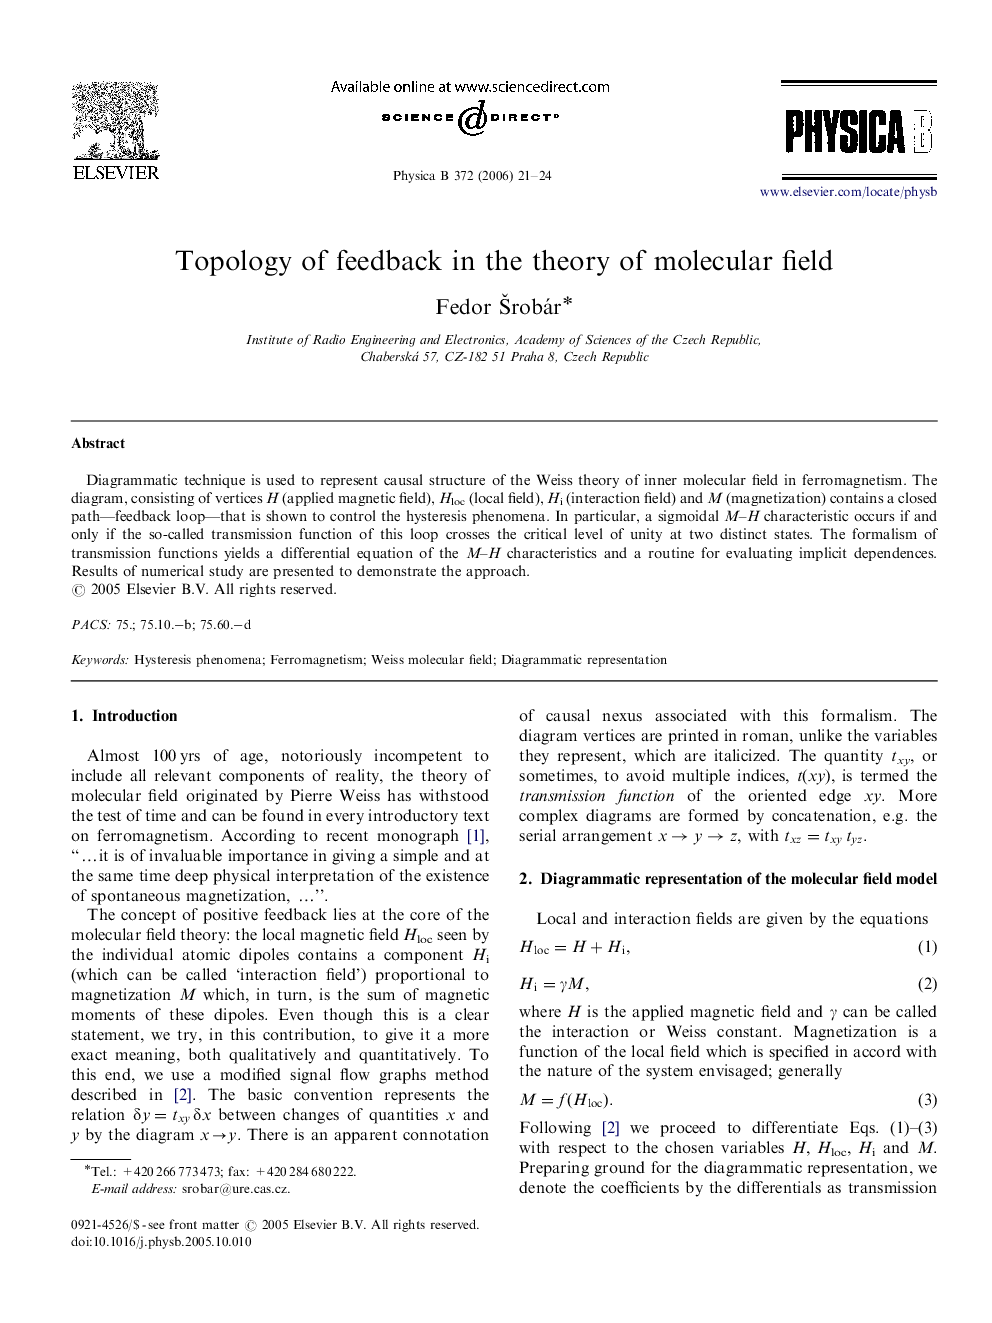 Topology of feedback in the theory of molecular field